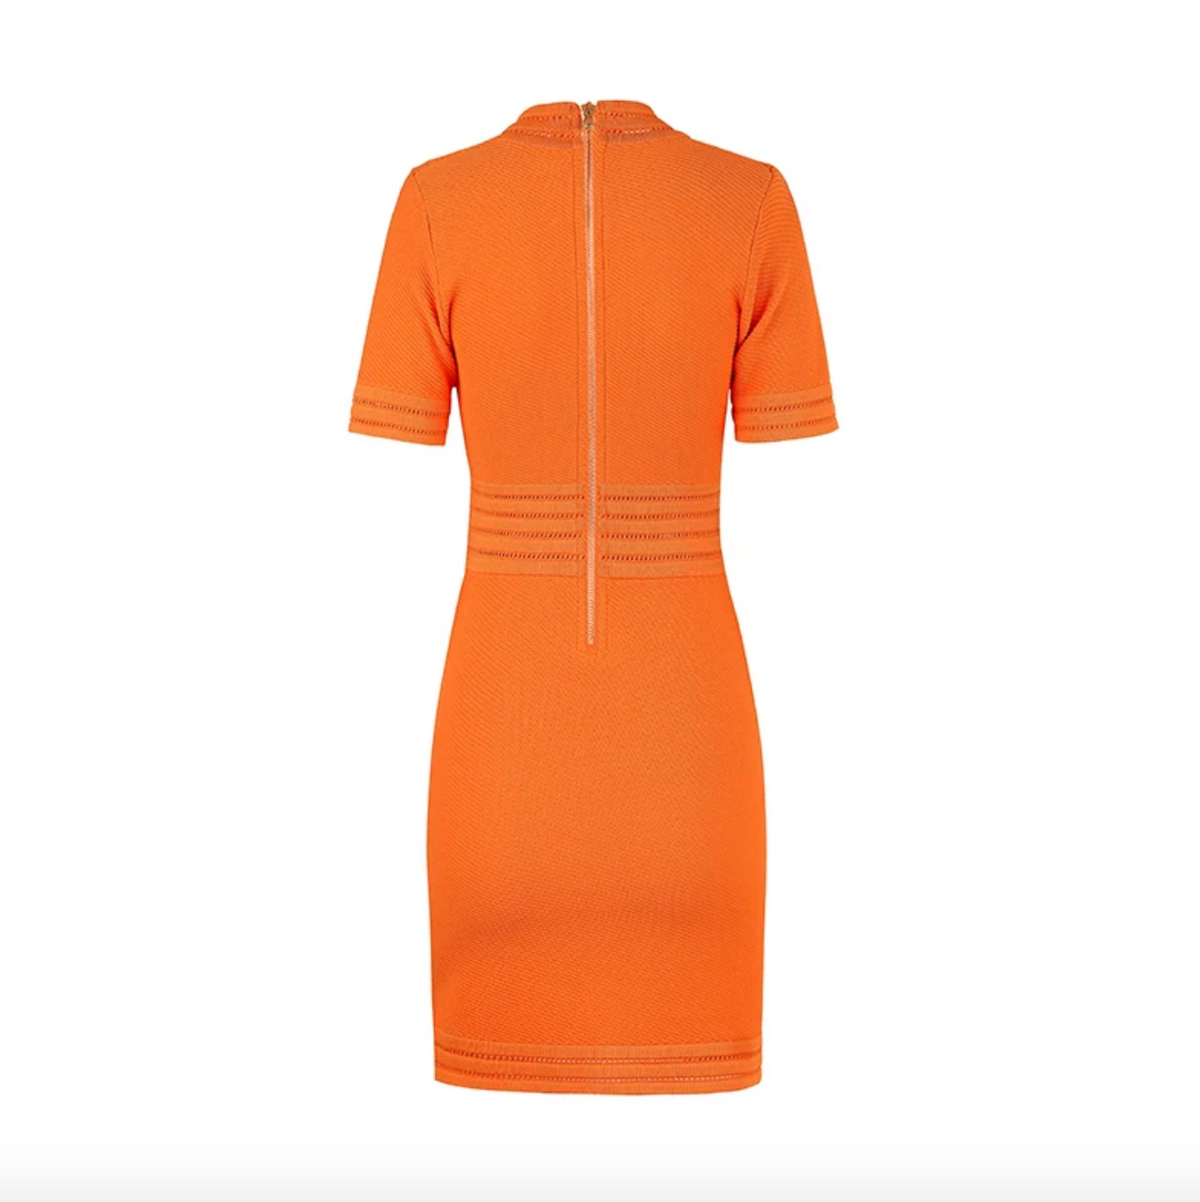 The Natalynska GALINA dress is a stunning short sleeved bodycon evening dress with banding detail at the centre to cinch in the waist and gold button detailing BALMAIN inspired dress hot orange